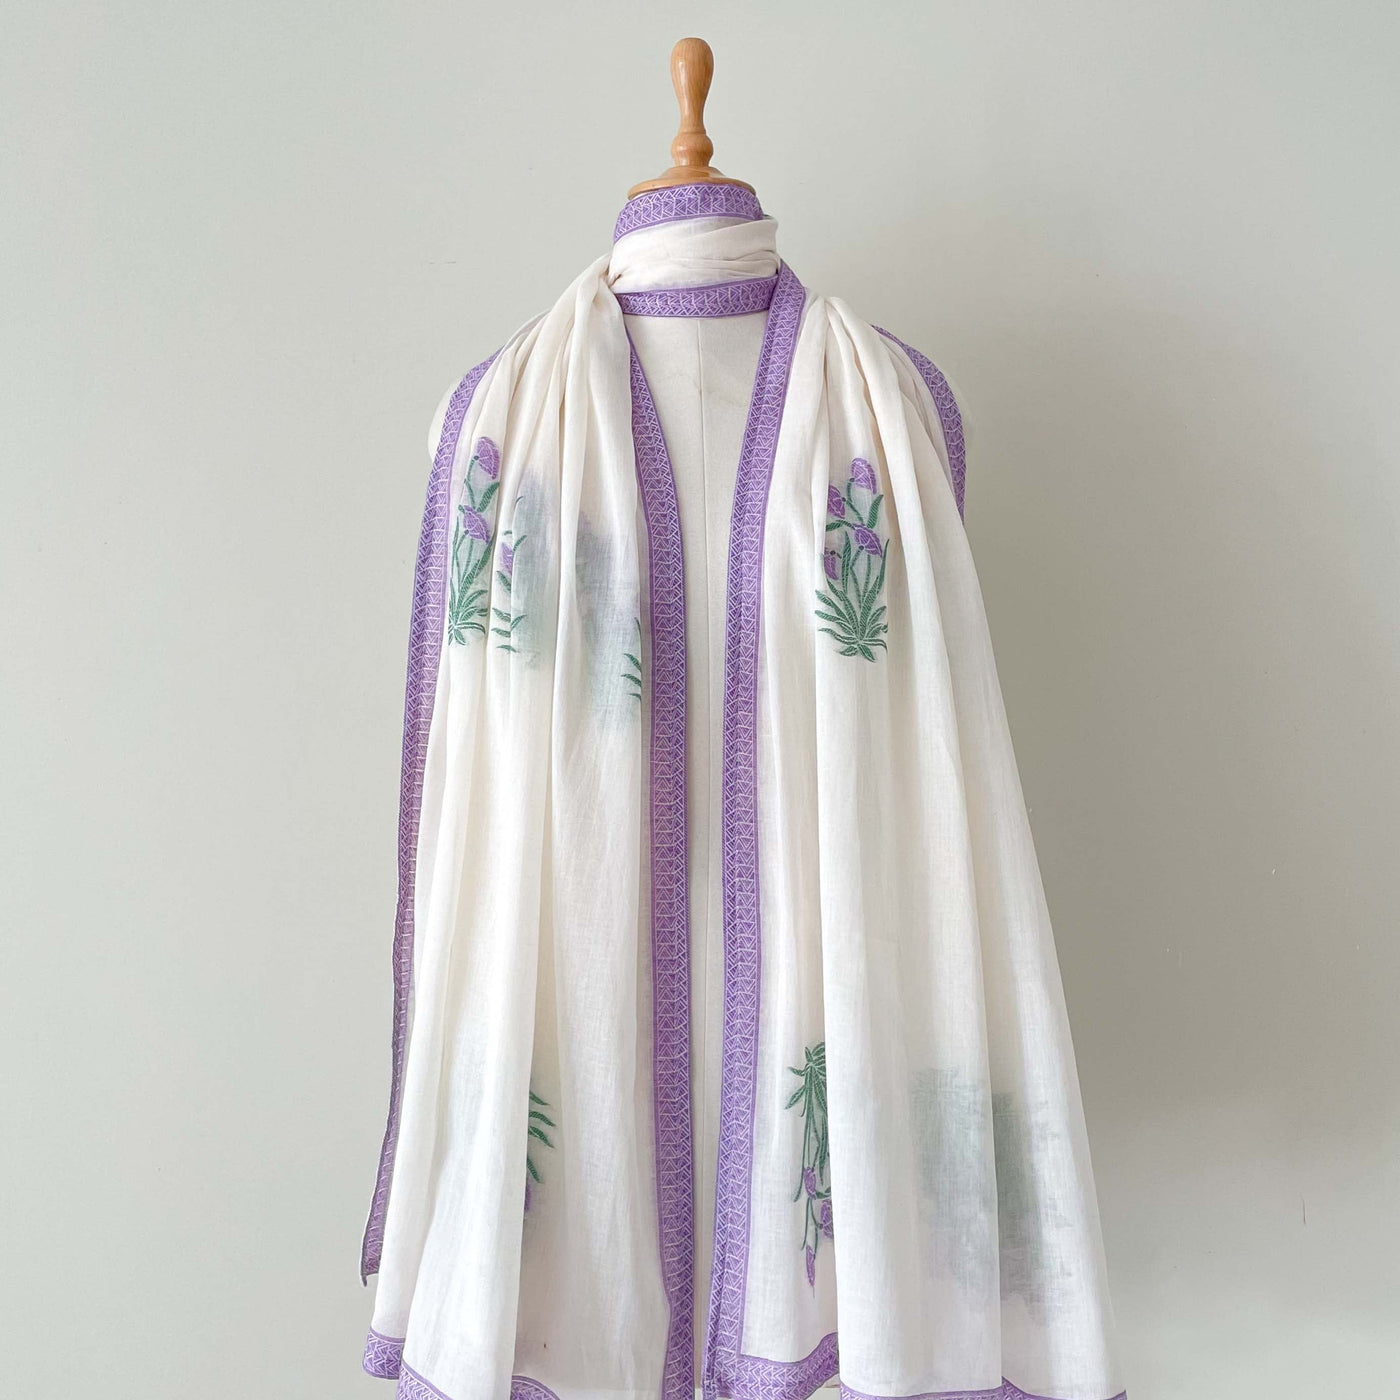 Fabric Pandit Dupatta White and Lilac Blue Dyeable Woven Flowers of Taj Pure Mul Cotton Dupatta (2.3 Meters)